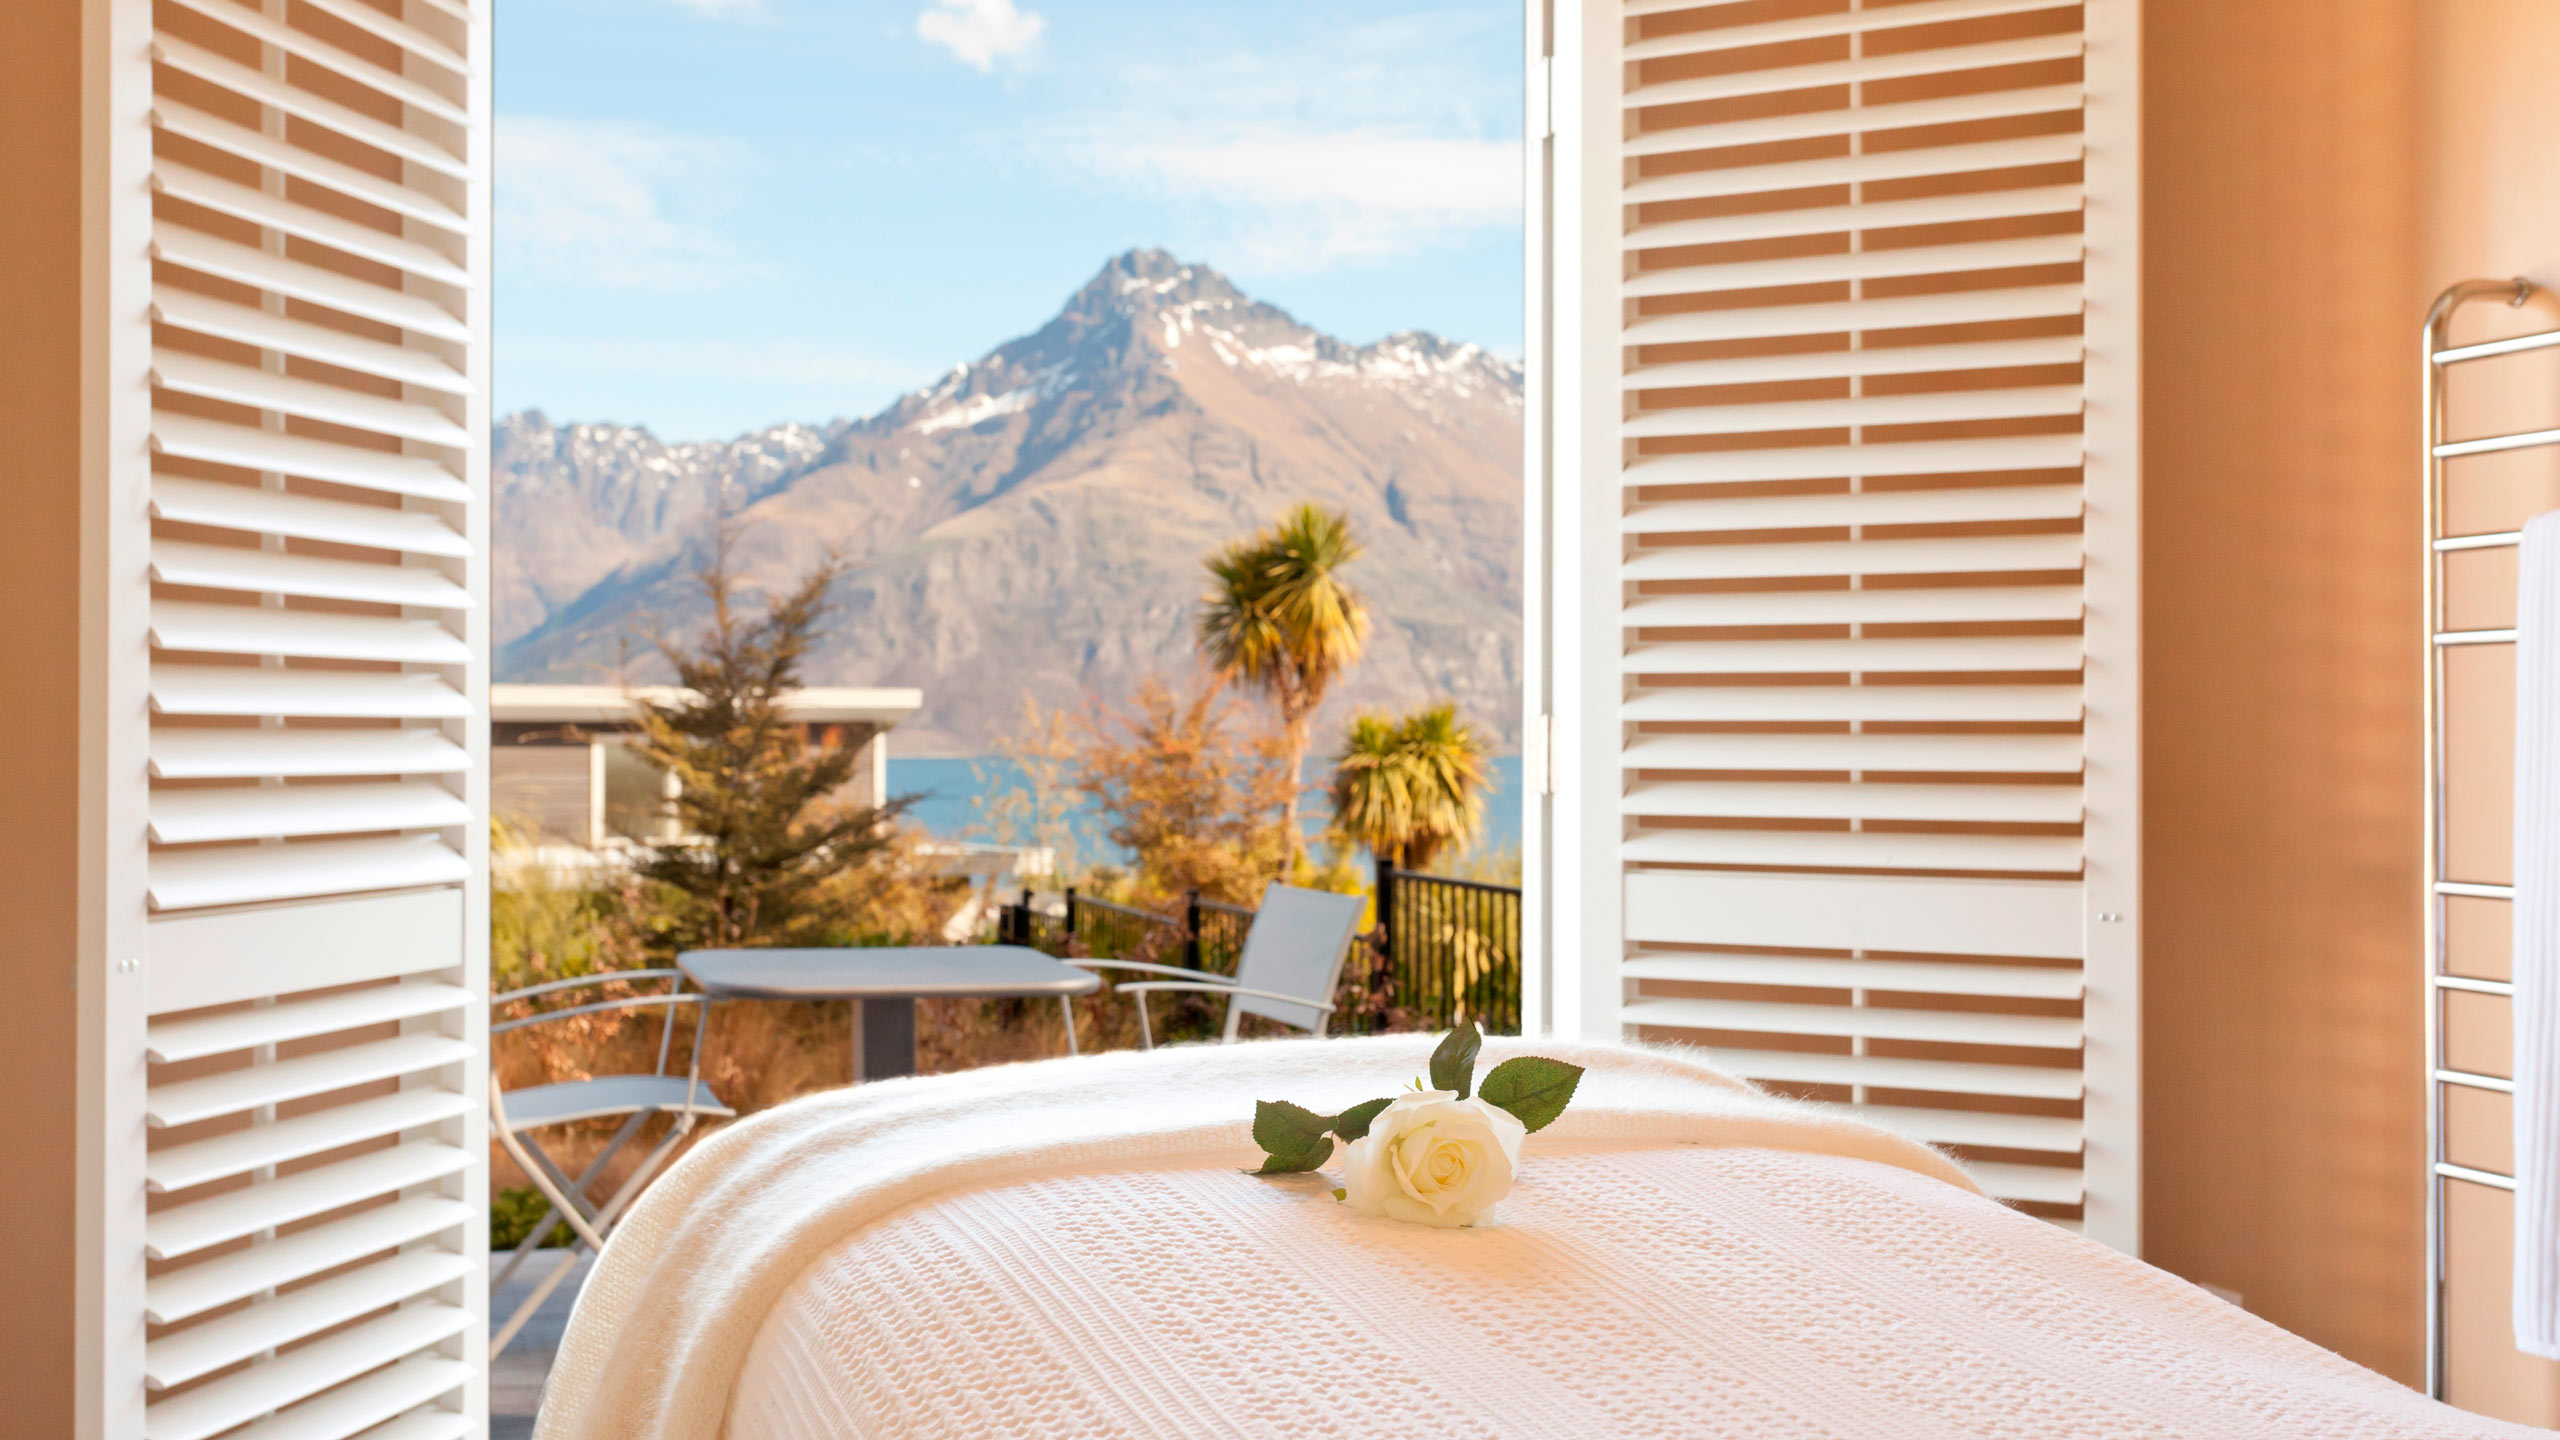 matakauri-lodge-queenstown-new-zealand-Treatment-Suite-With-Private-Patio